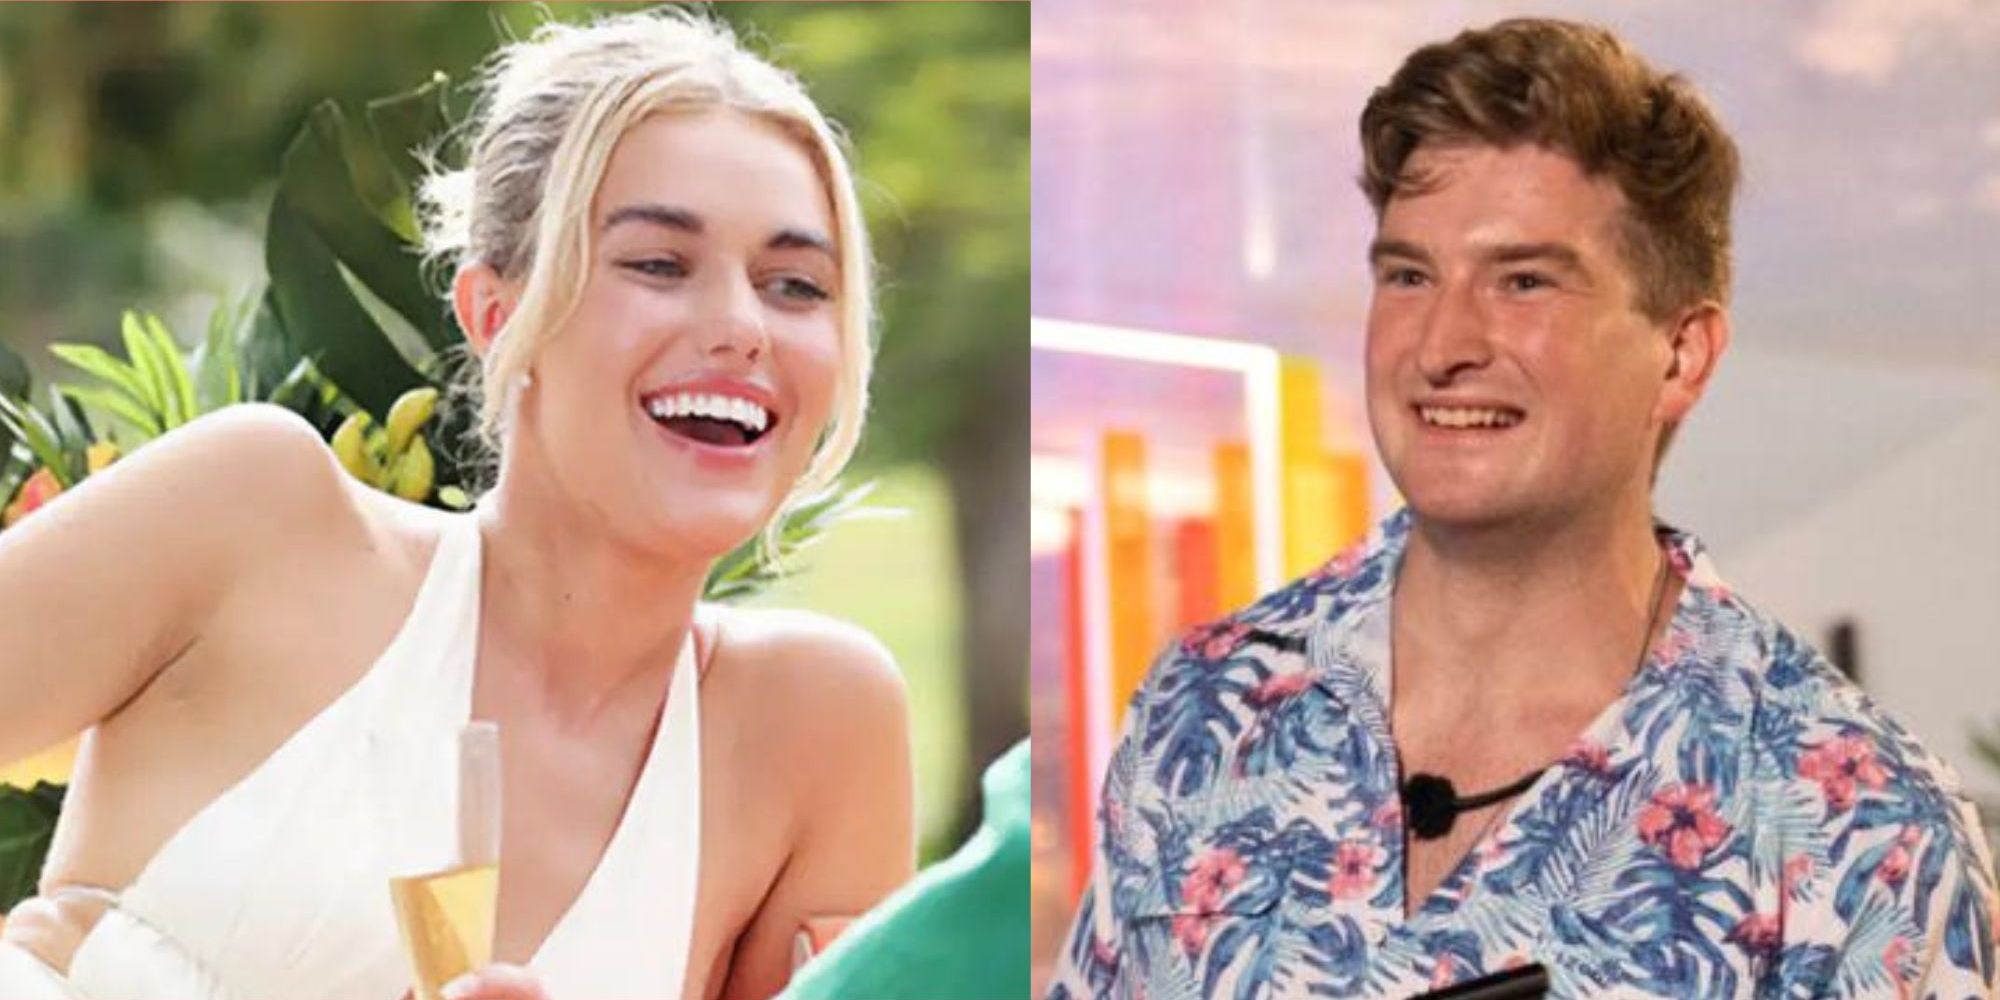 Love Island USA Fan Voting Could Be Bad News For Carmen & Bergie